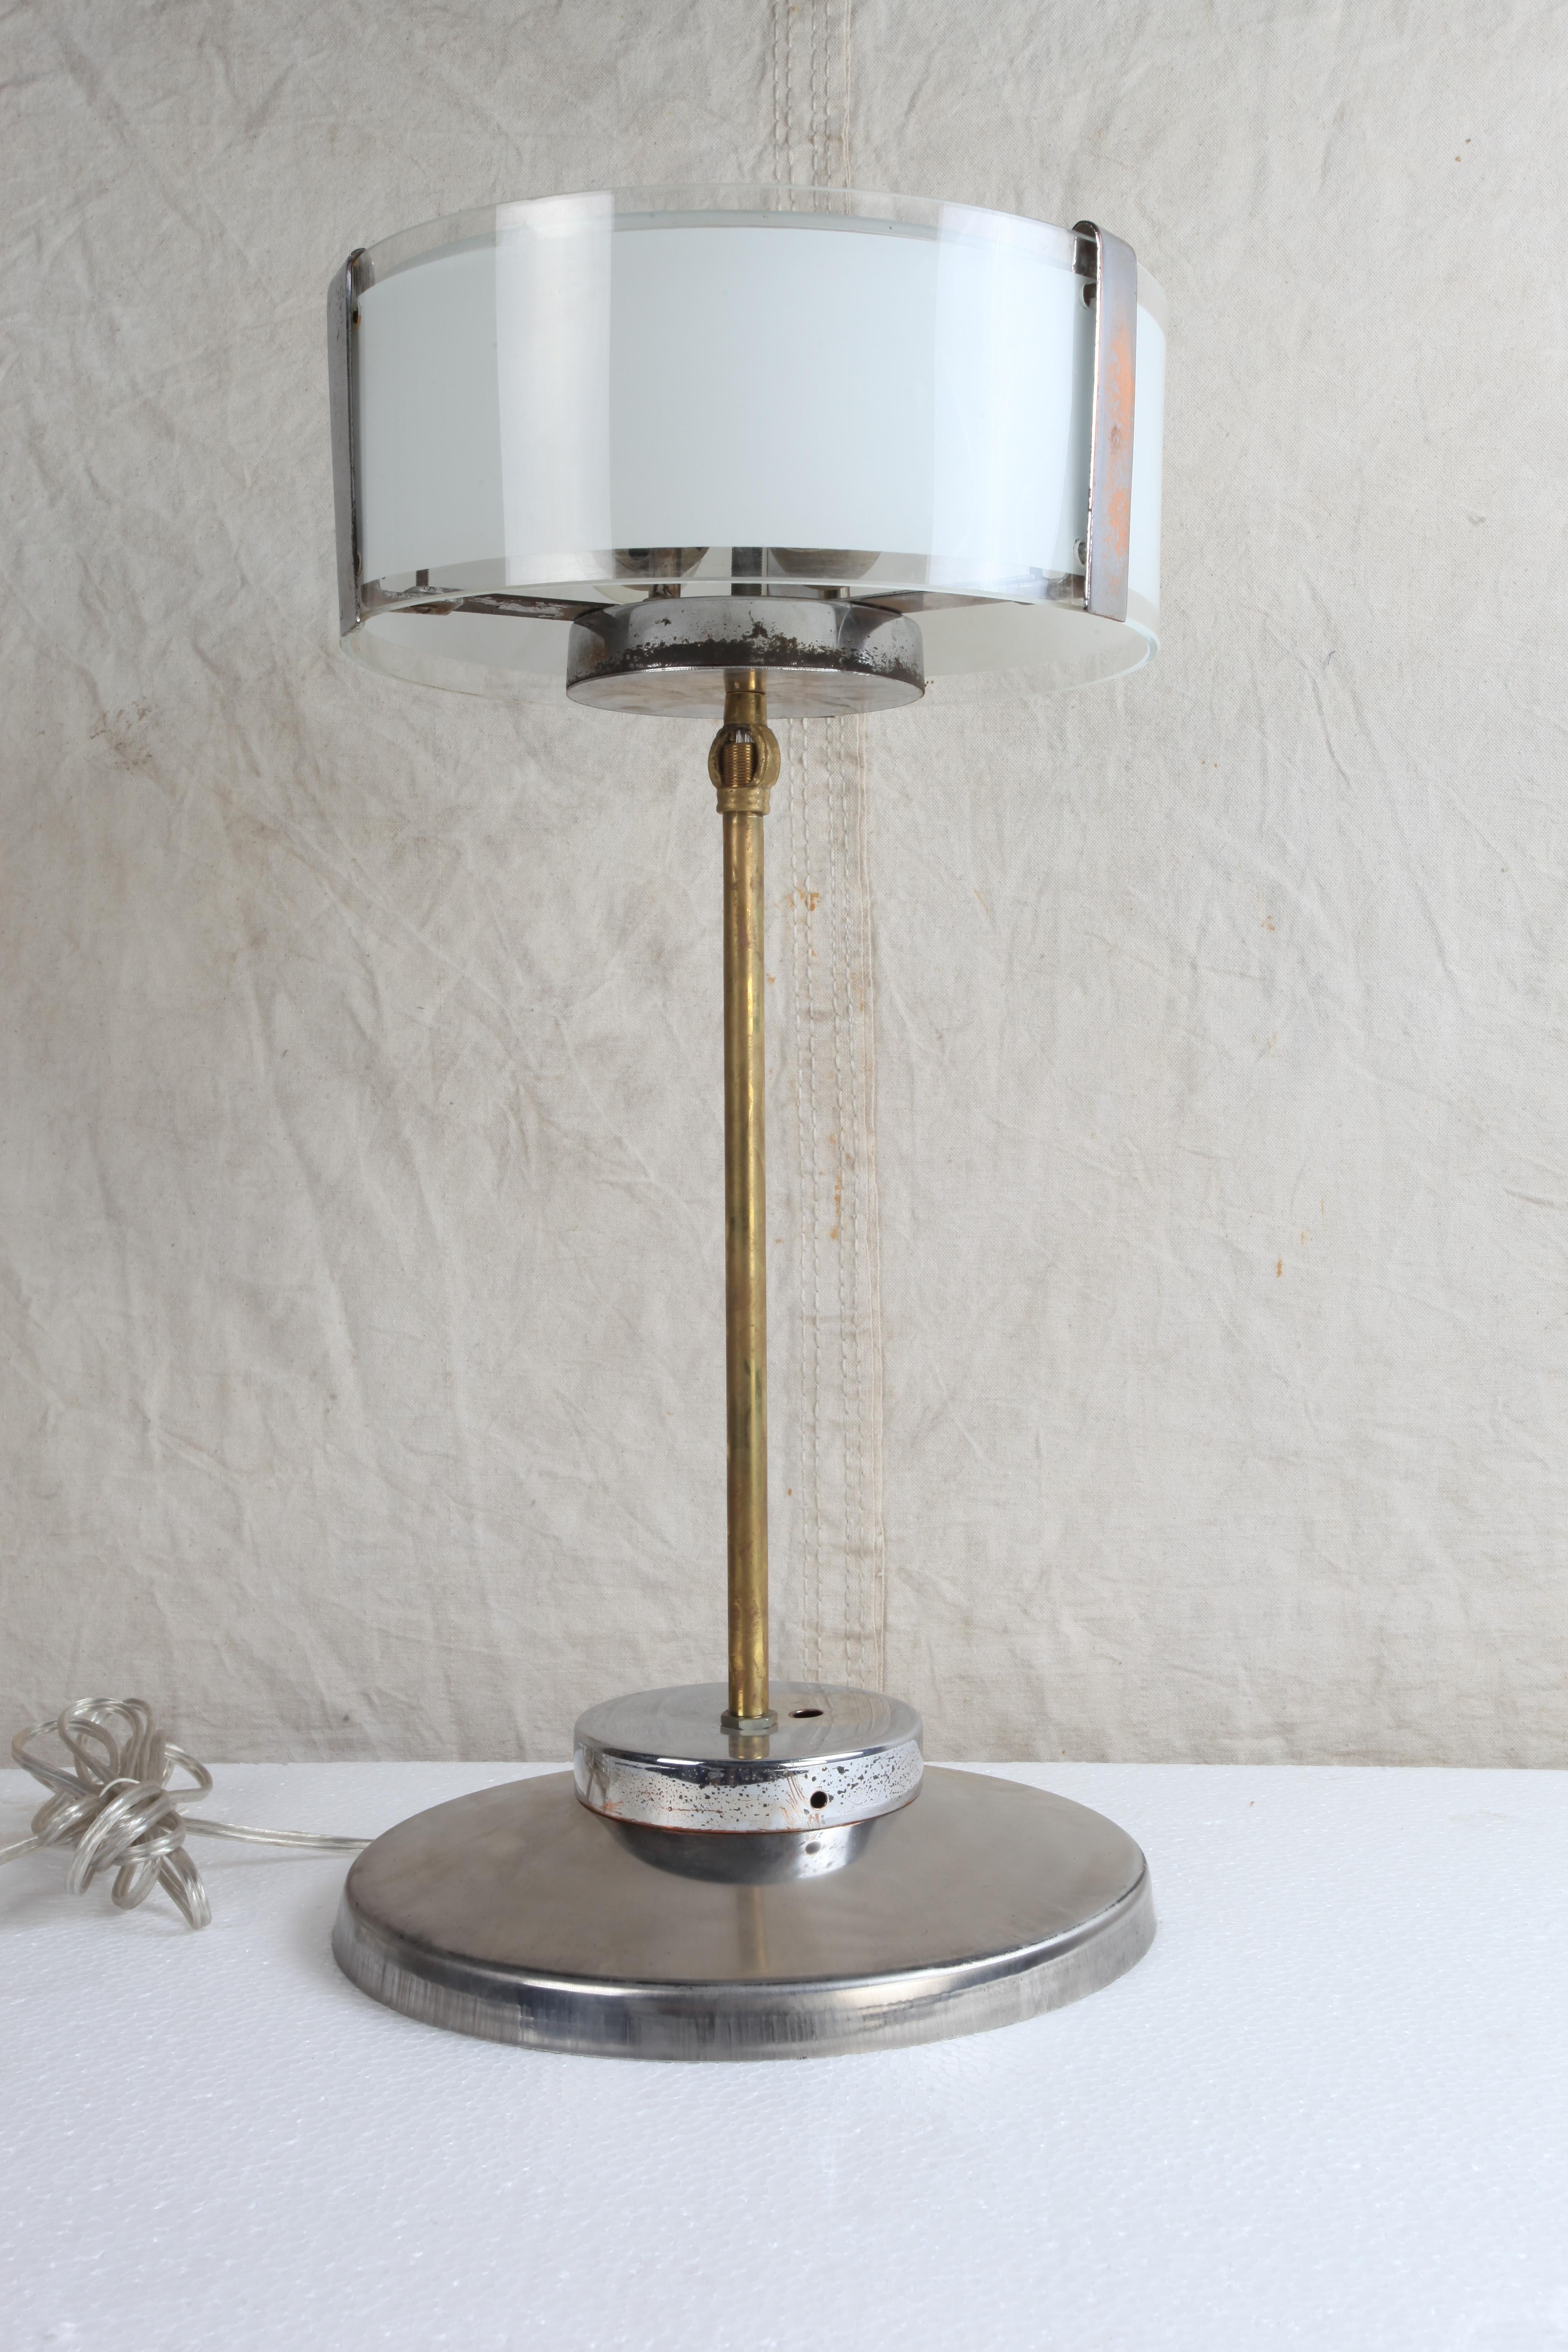 Pair of Chrome and Frosted Glass Mid-Century Modern Table Lamps or Pendants In Good Condition For Sale In Nantucket, MA